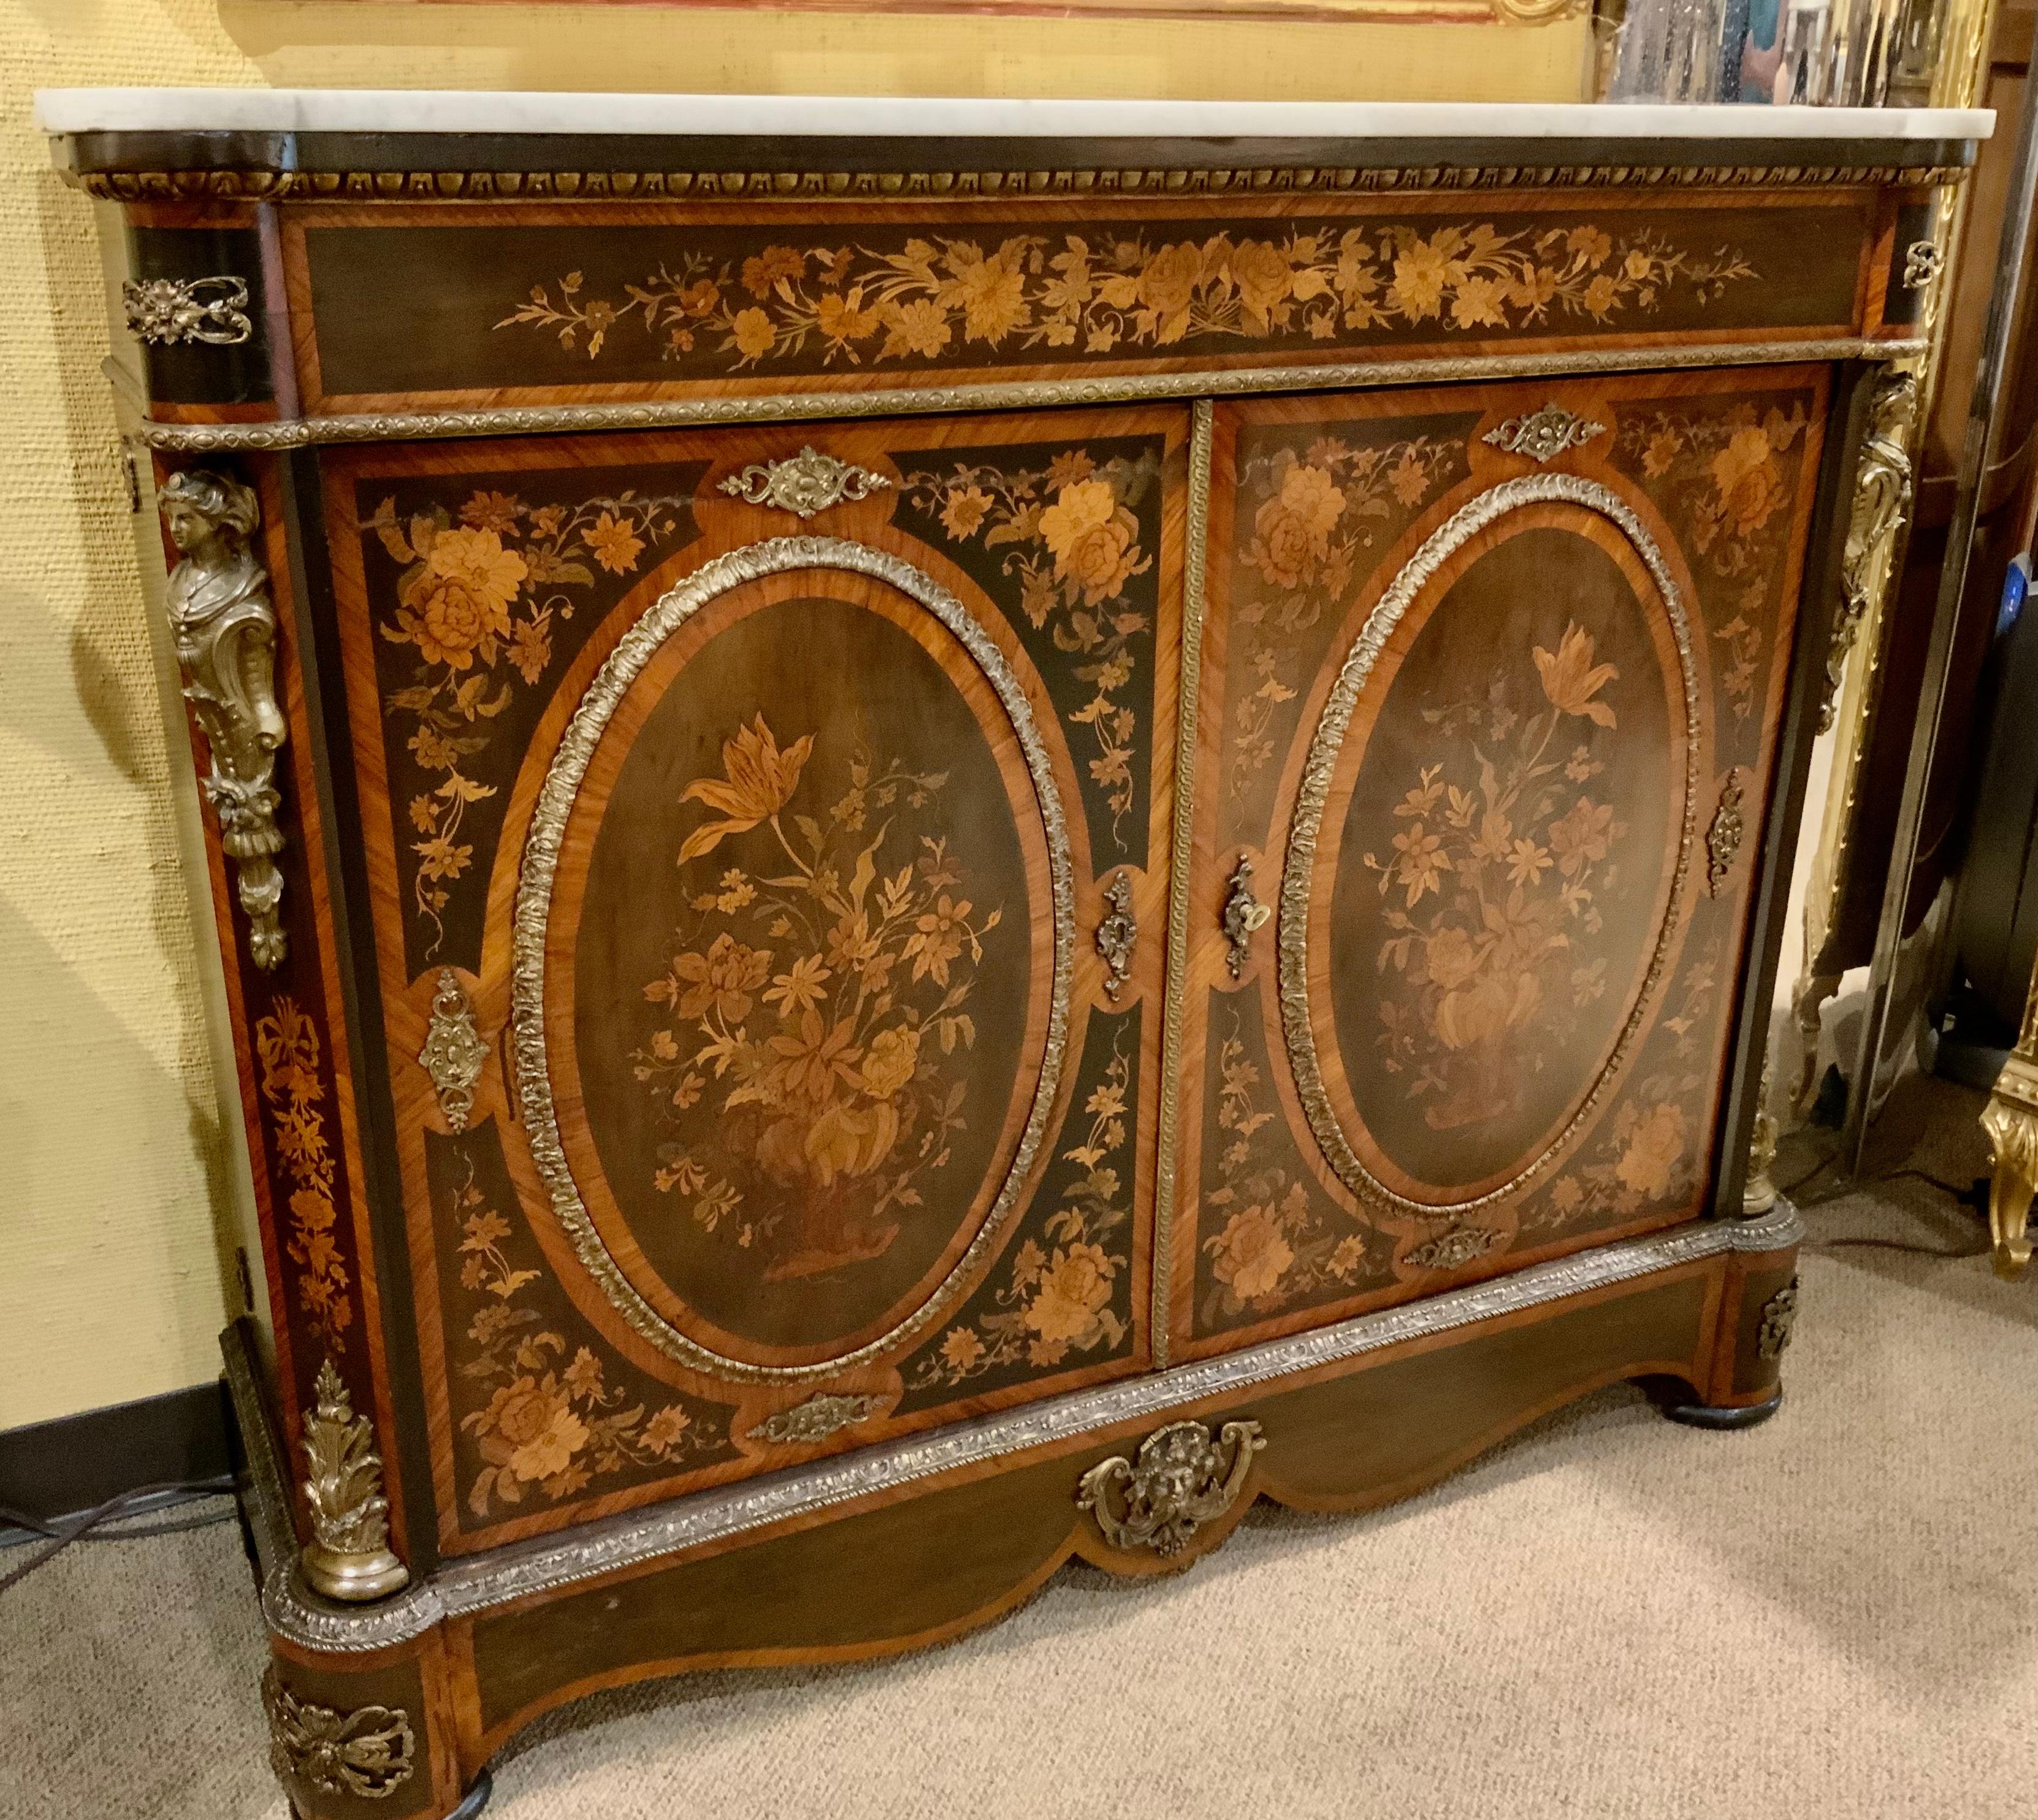 Exceptional and intricate marquetry work using various exotic woods.
Including kingwood, rosewood, satinwood make this piece especially.
Beautiful. Two cabinet doors open to interior with two shelves. The white
Marble top is without cracks or